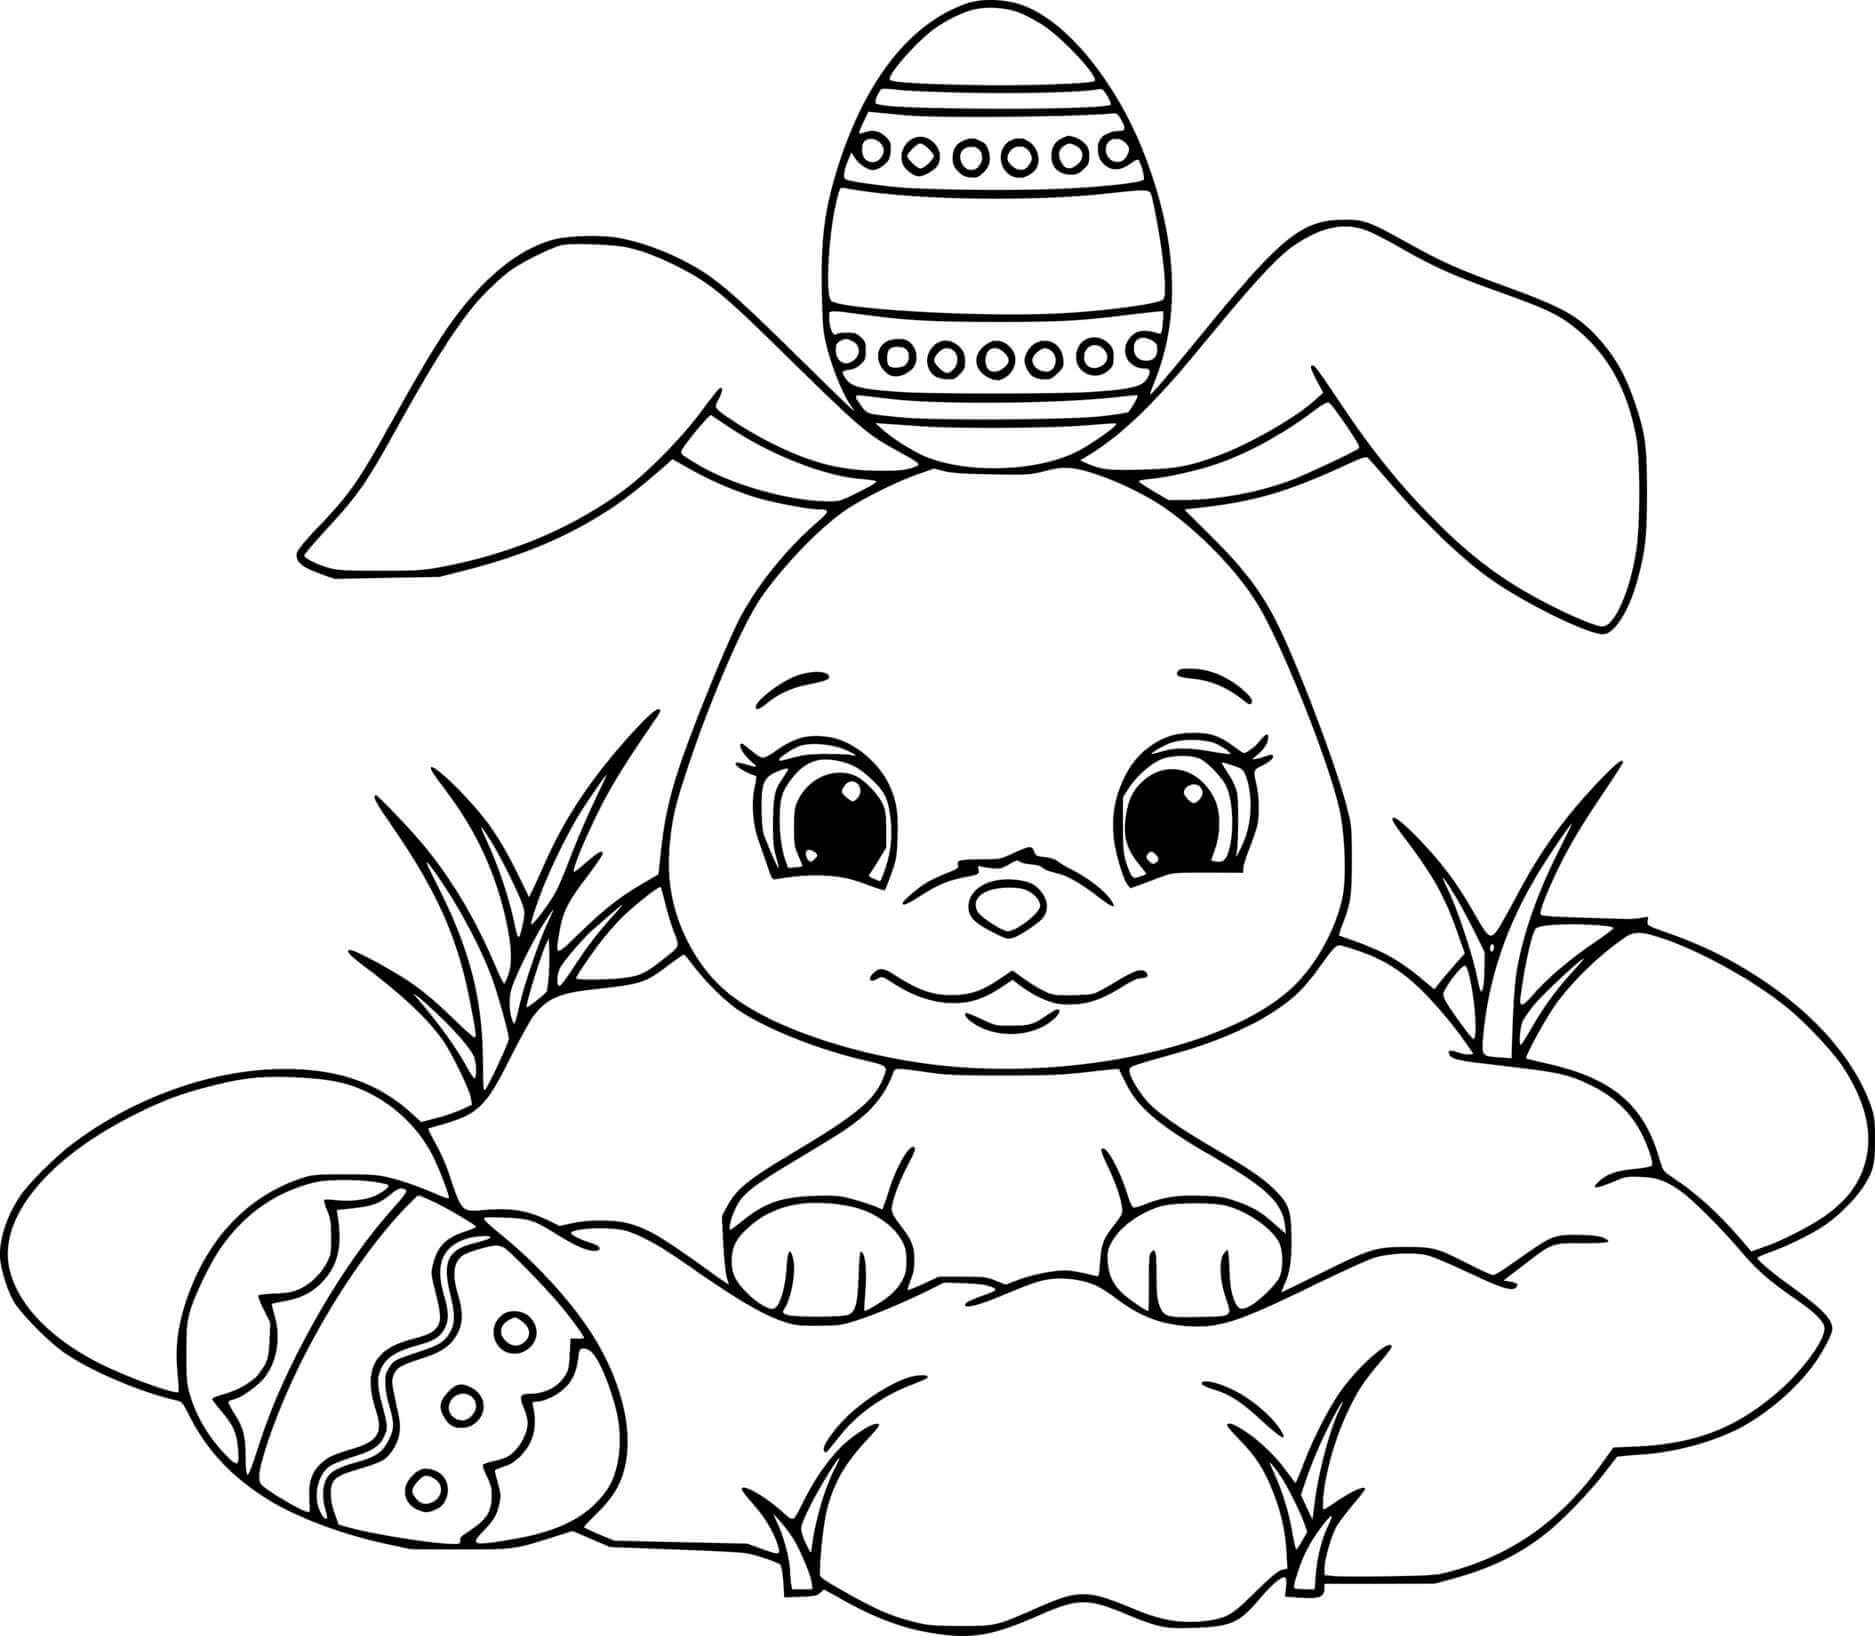 An Egg On The Cute Easter Bunnys Head Coloring Page